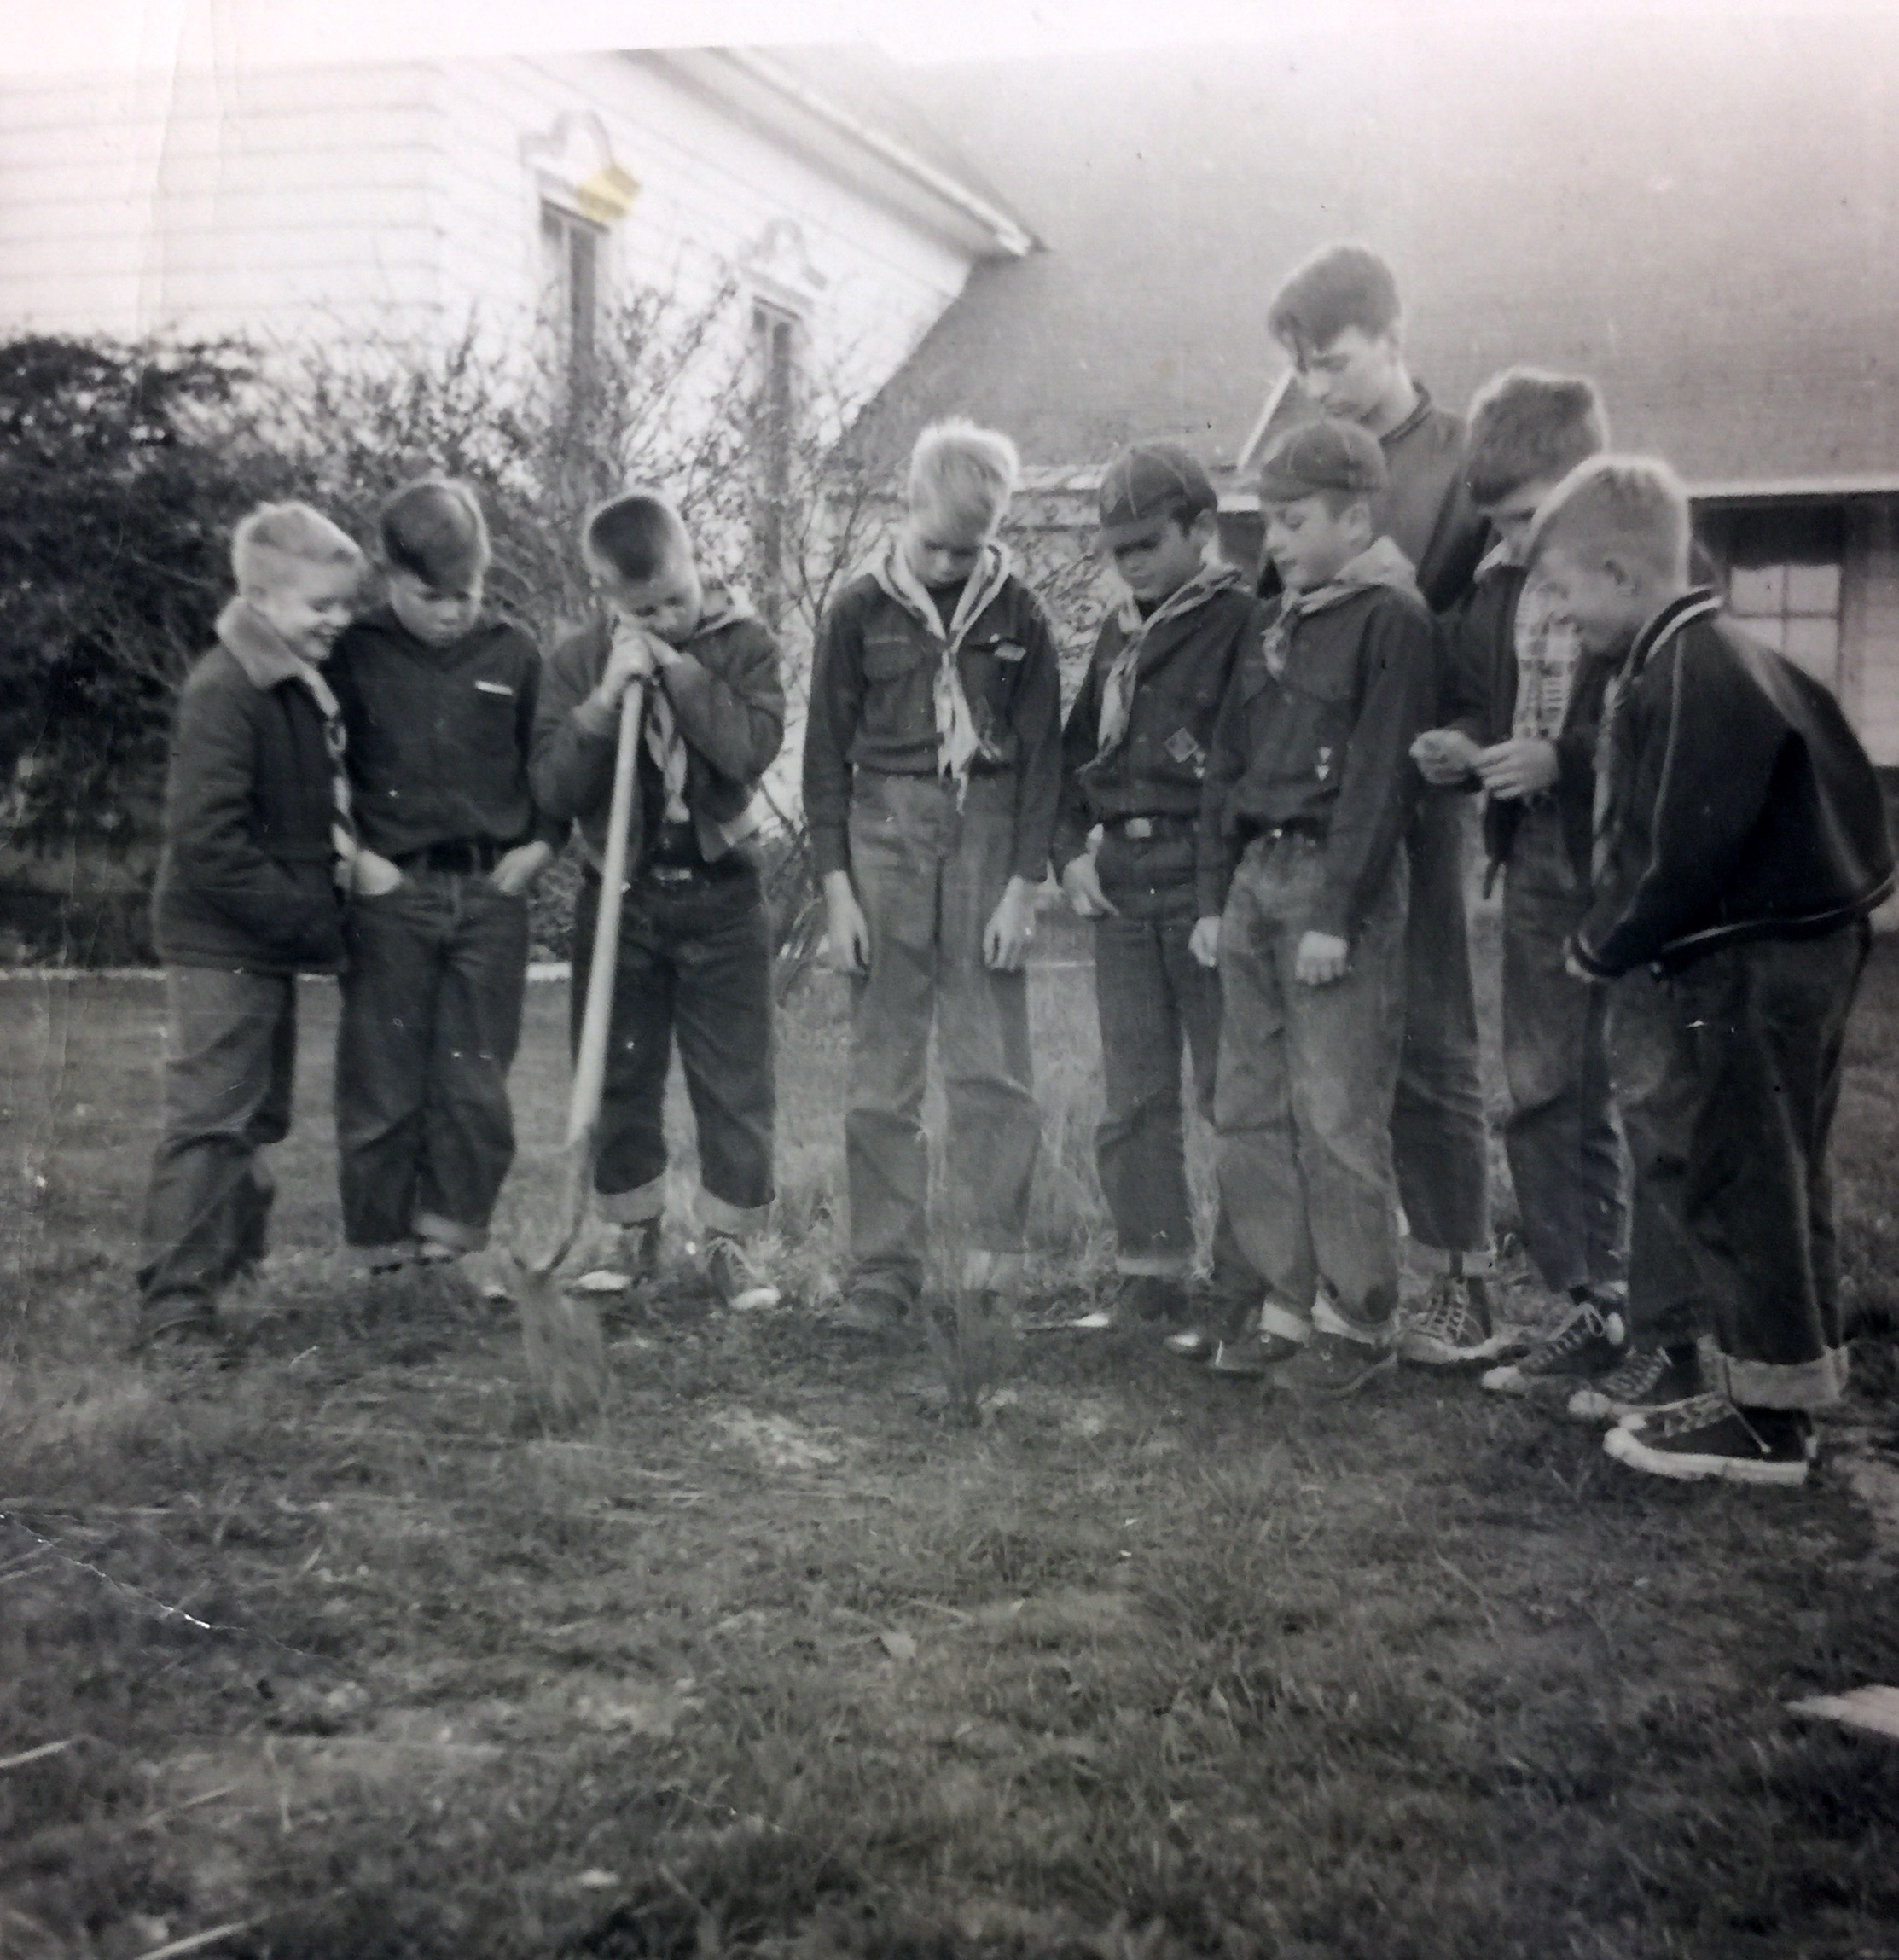 Cub Scouts pack 51. Planting ceremonies at Fairview Church march 10 1954